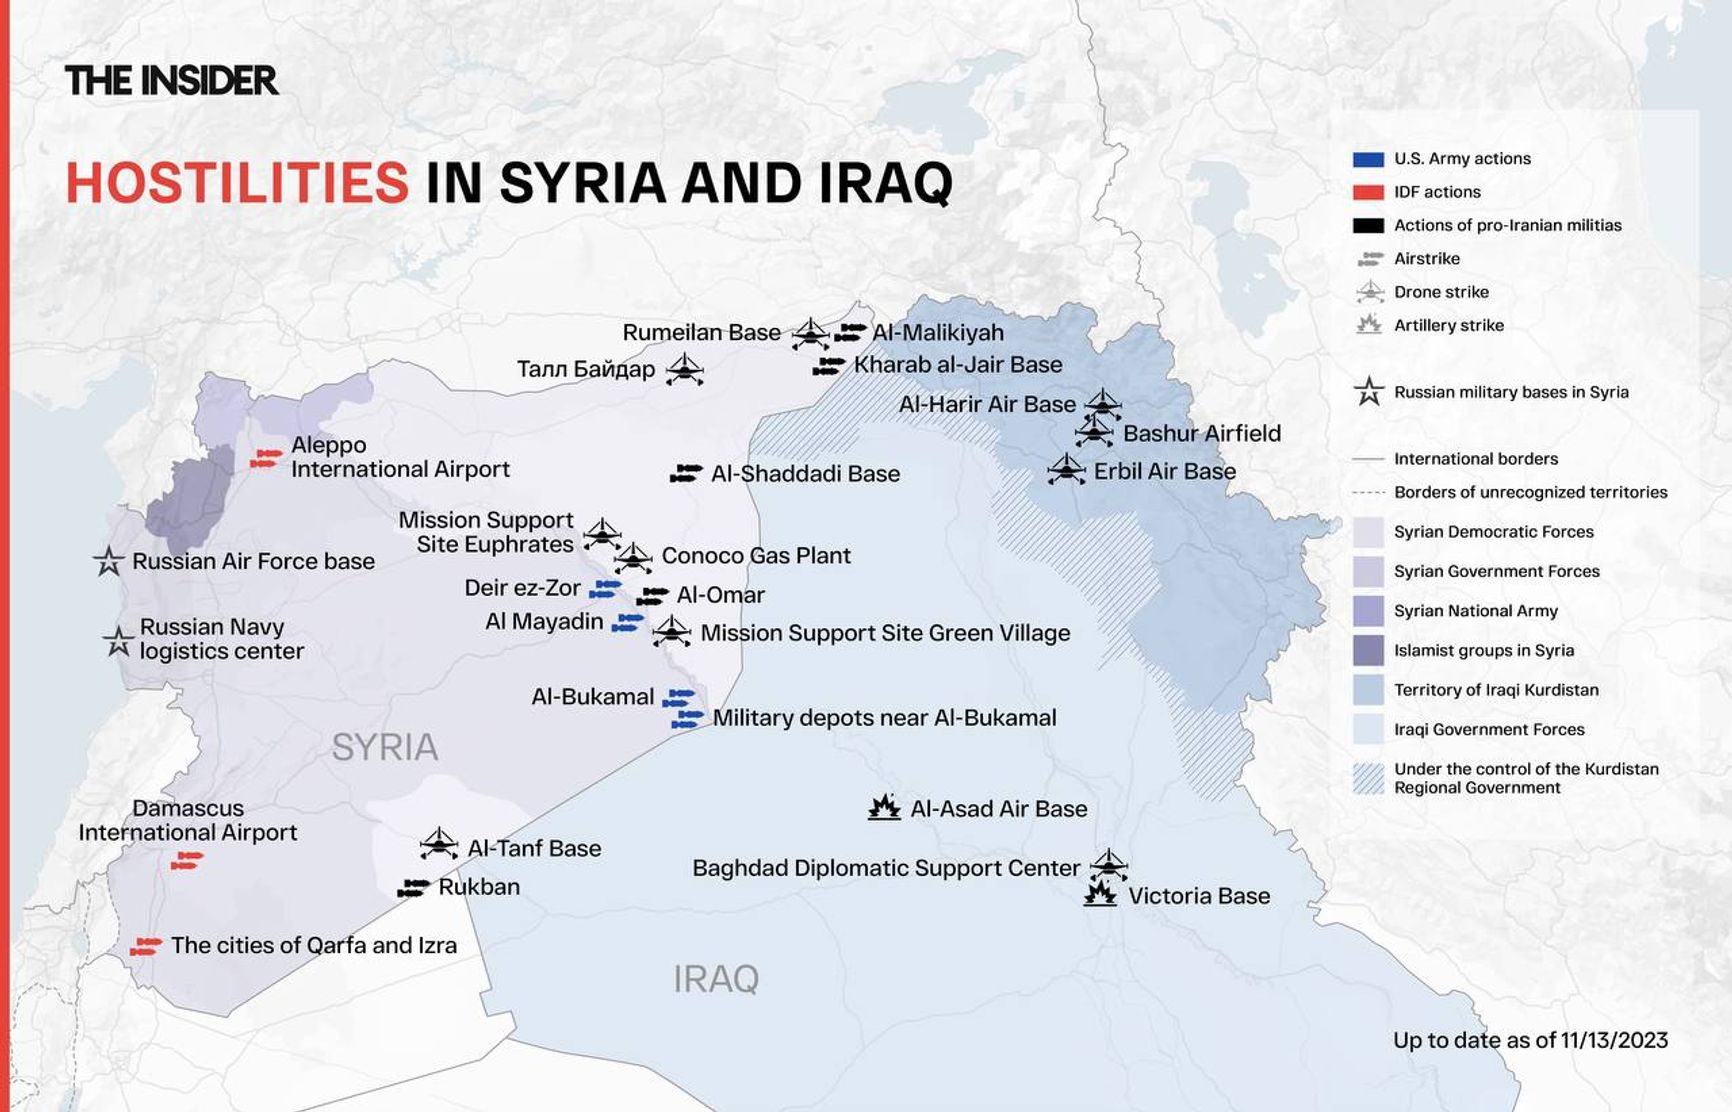 Combat operations in Syria and Iraq